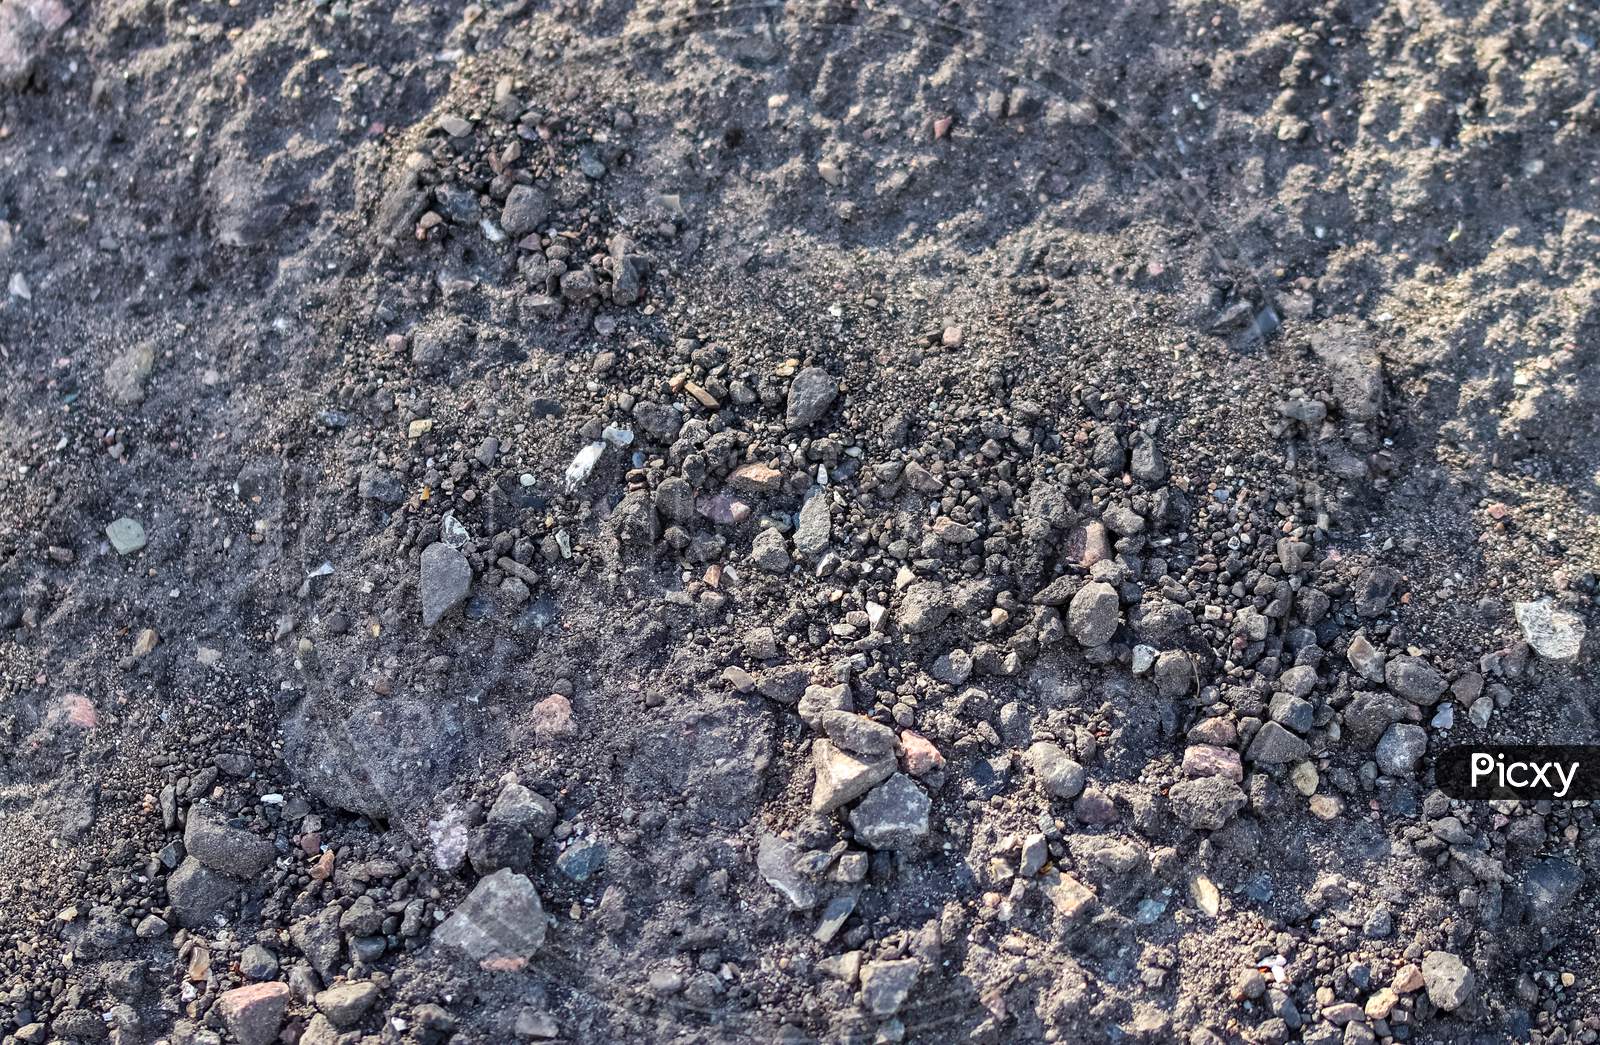 Close up view on sand ground surfaces and textures in high resolution